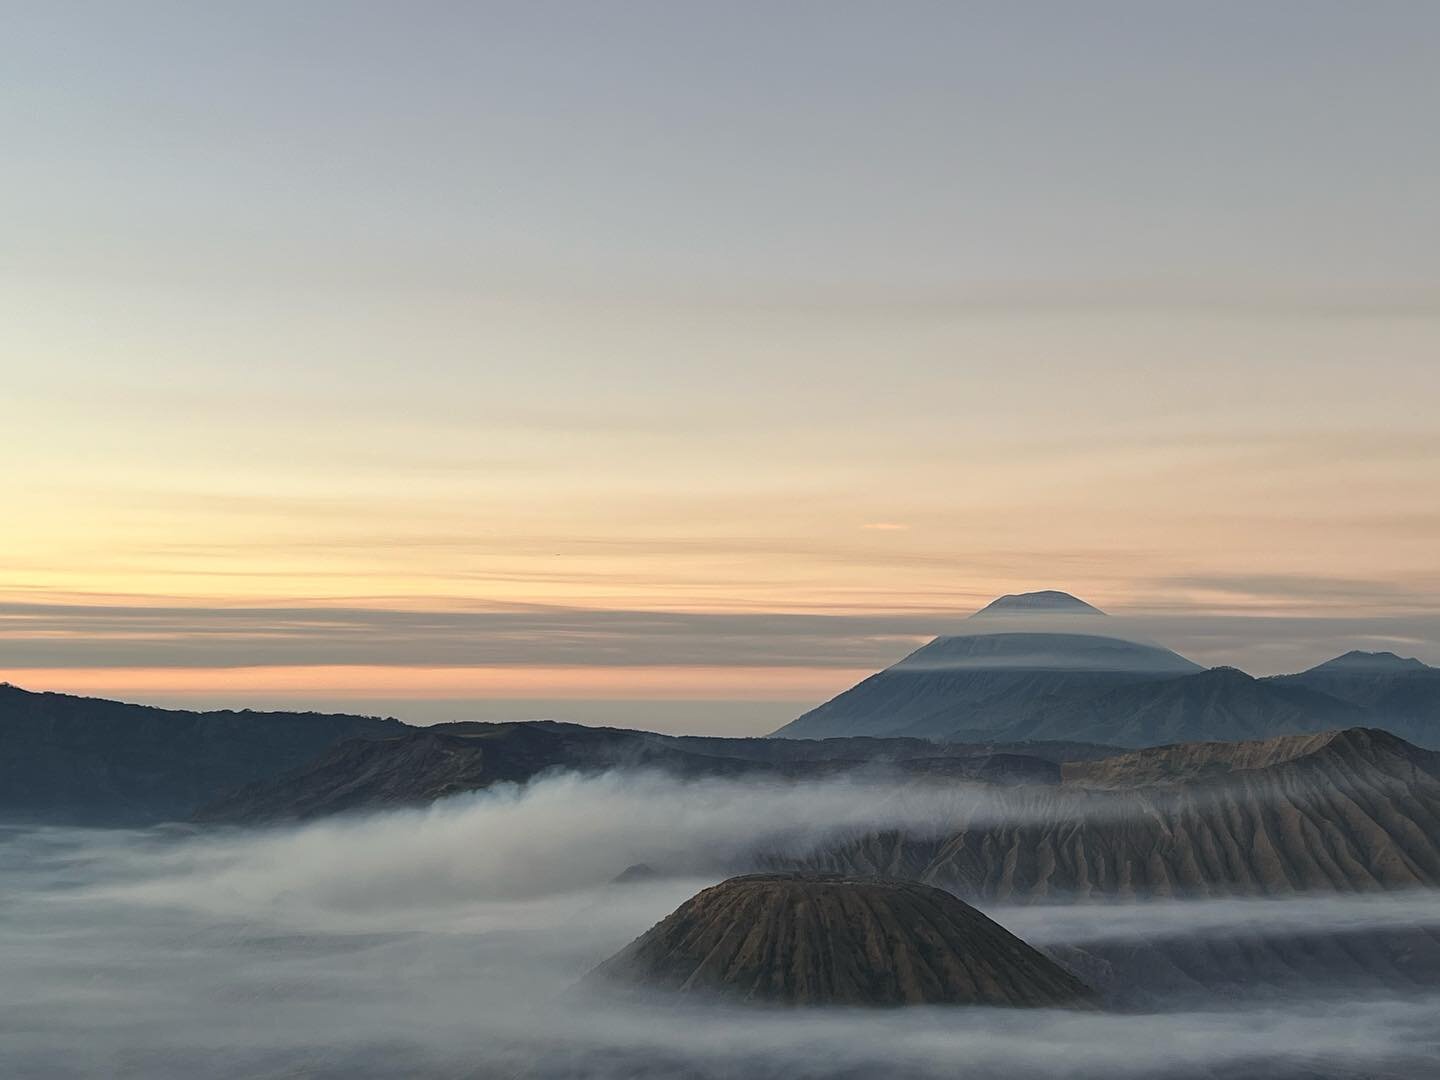 we&rsquo;ve seen quite a few sunrise together, from #bromo to #ijen. what an adventure in two days!